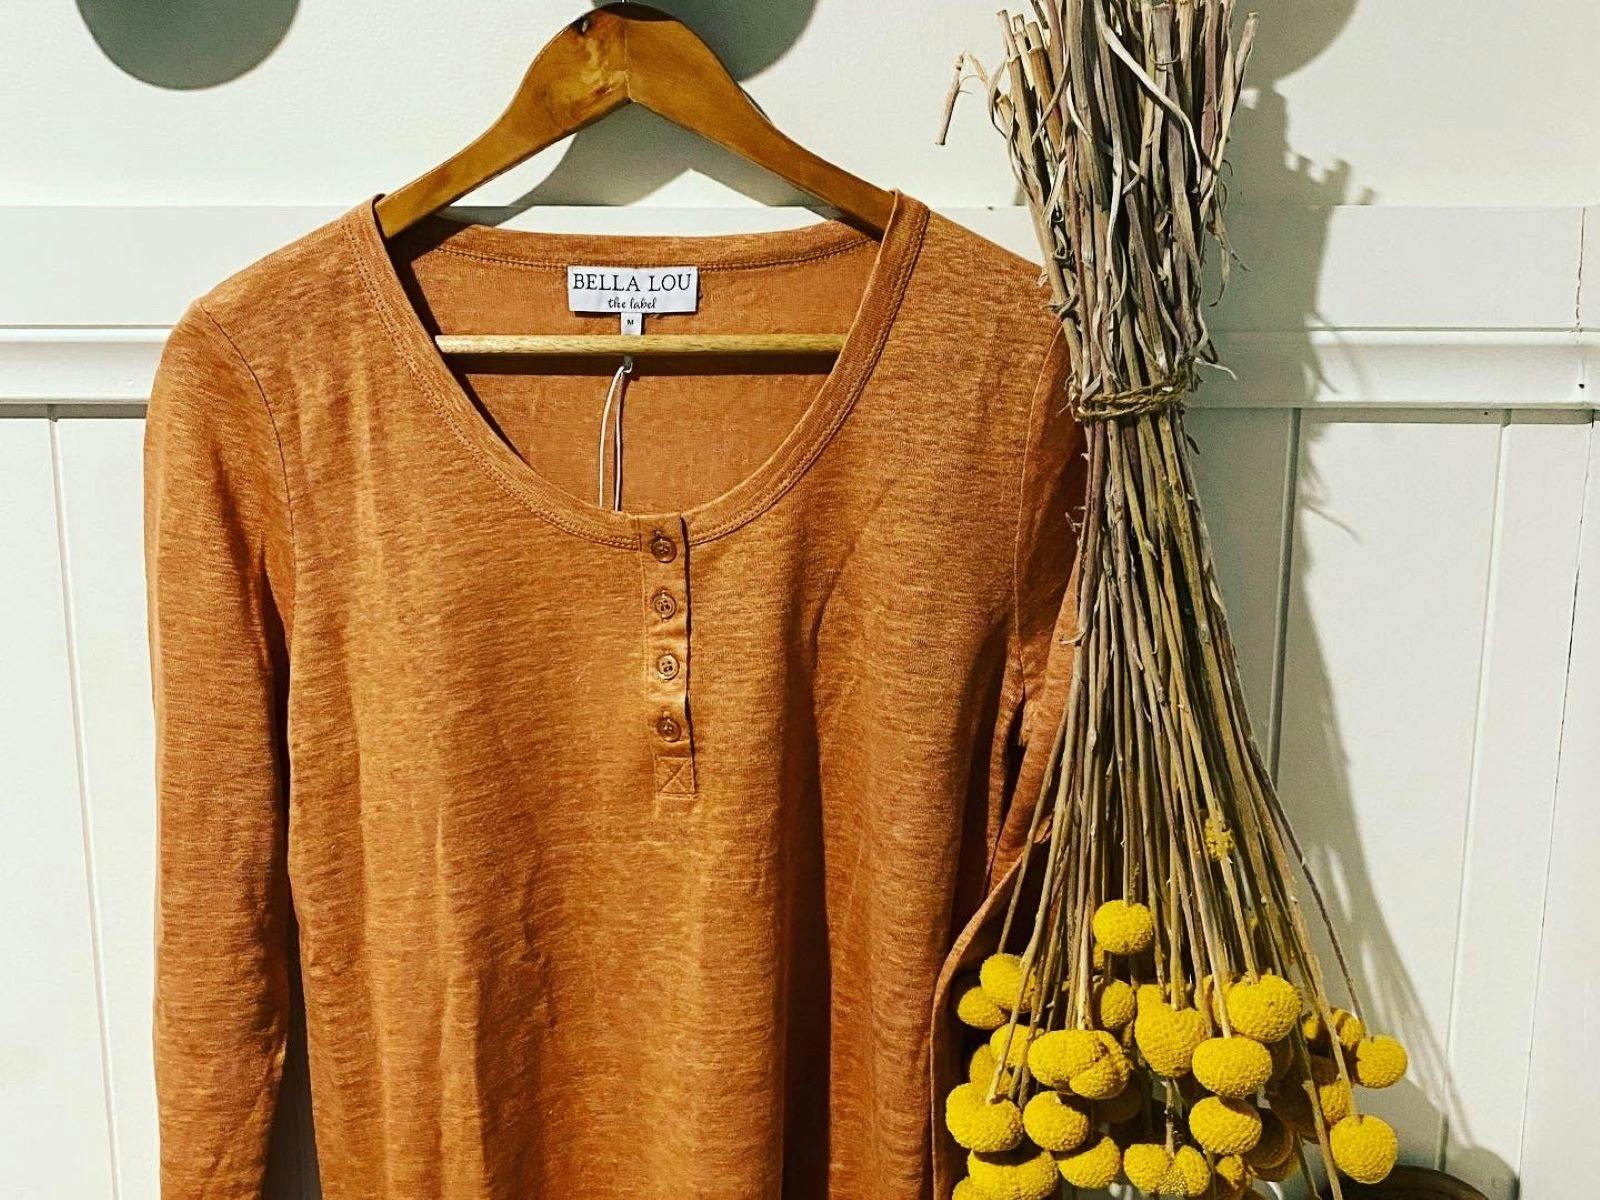 Bella Lou brown long sleeved shirt hanging next to dried yellow flowers